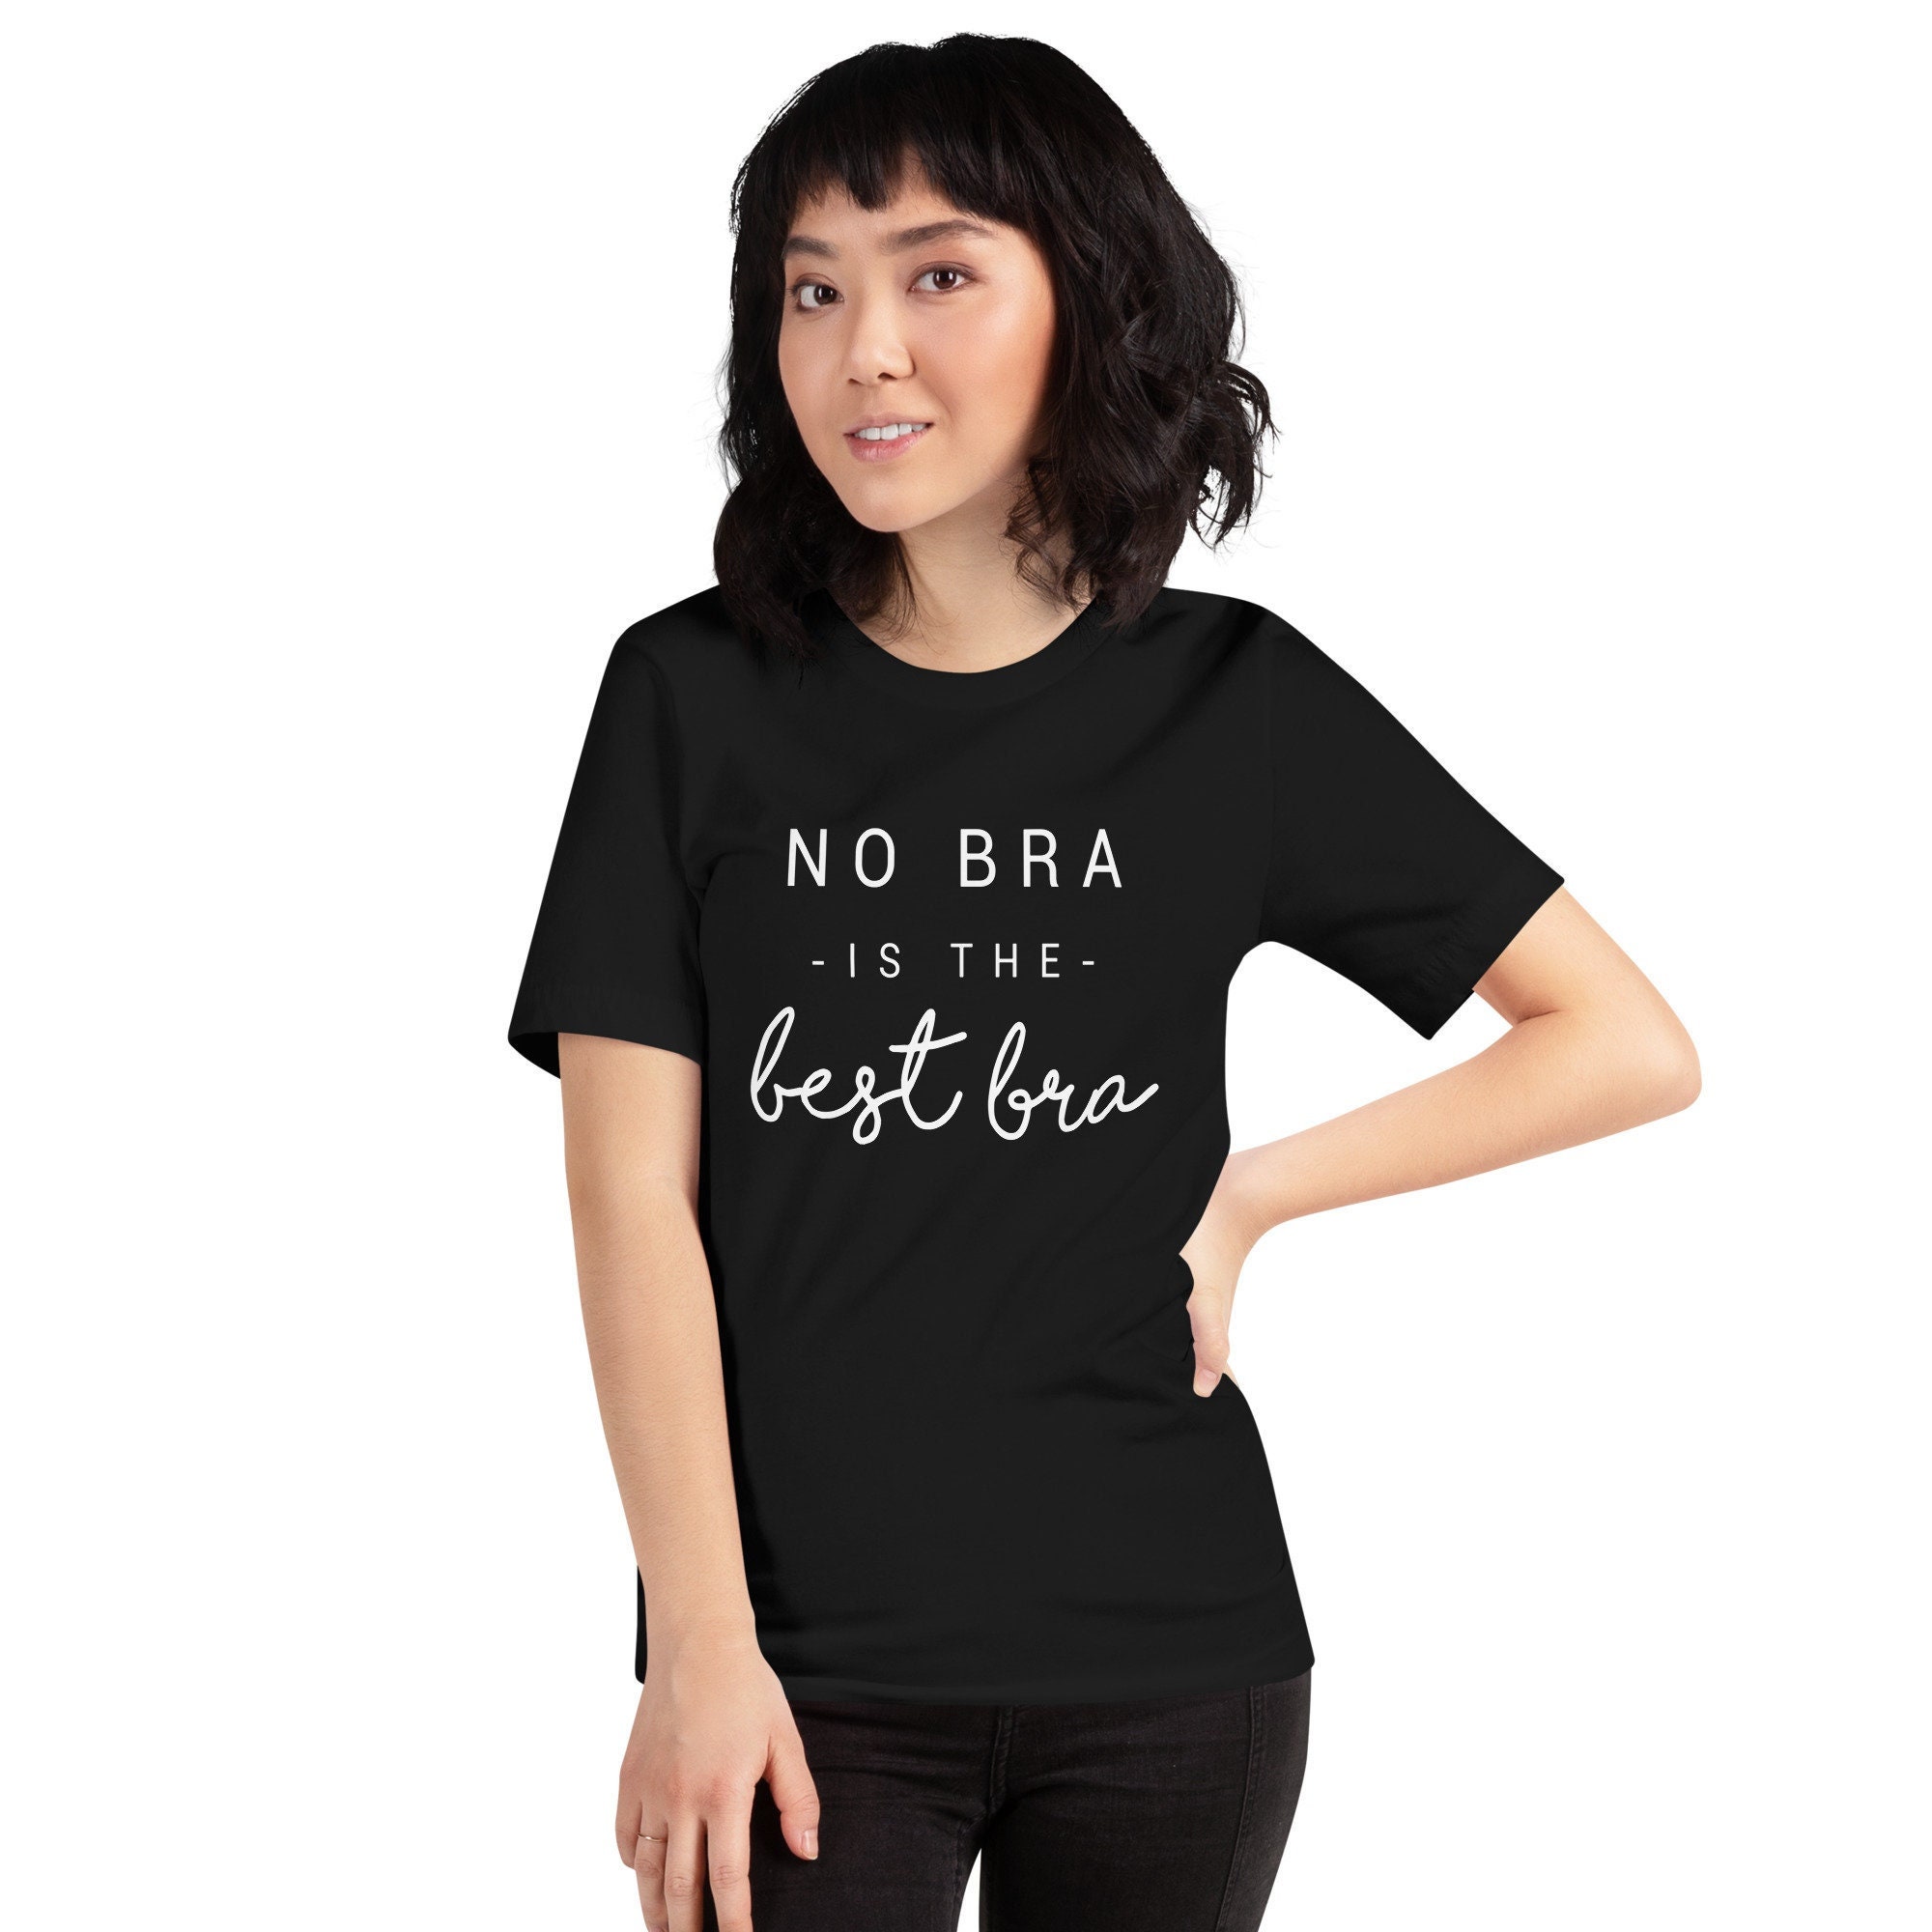 No Bra T-shirts Funny T Shirts for Women Instagram Shirts for Teens With  Sayings Graphic Tee Womens Tshirts 